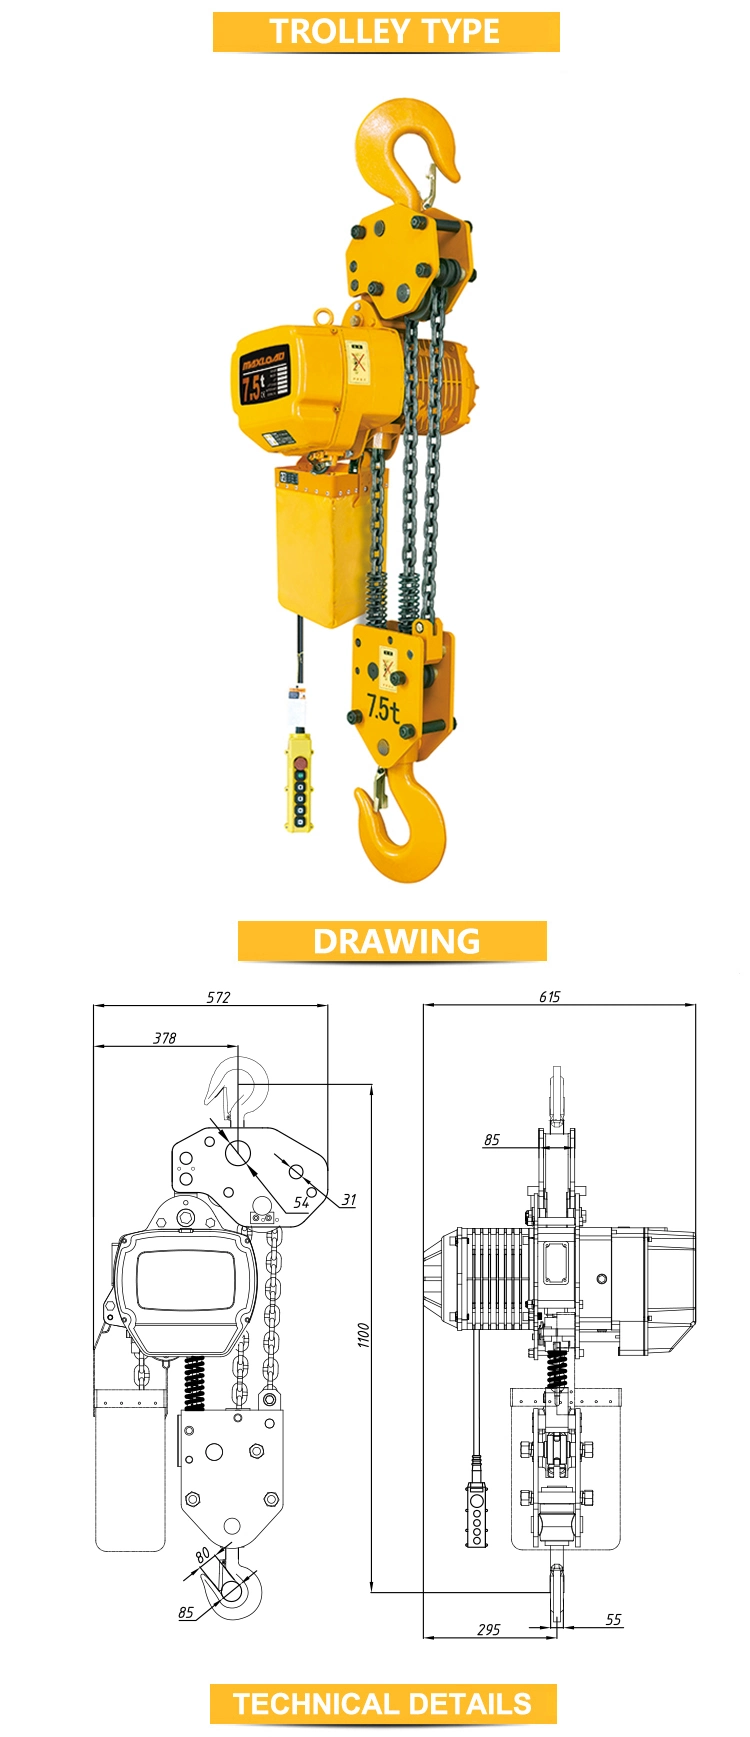 Fixed Model 7.5t Electric Chain Hoist for Sale